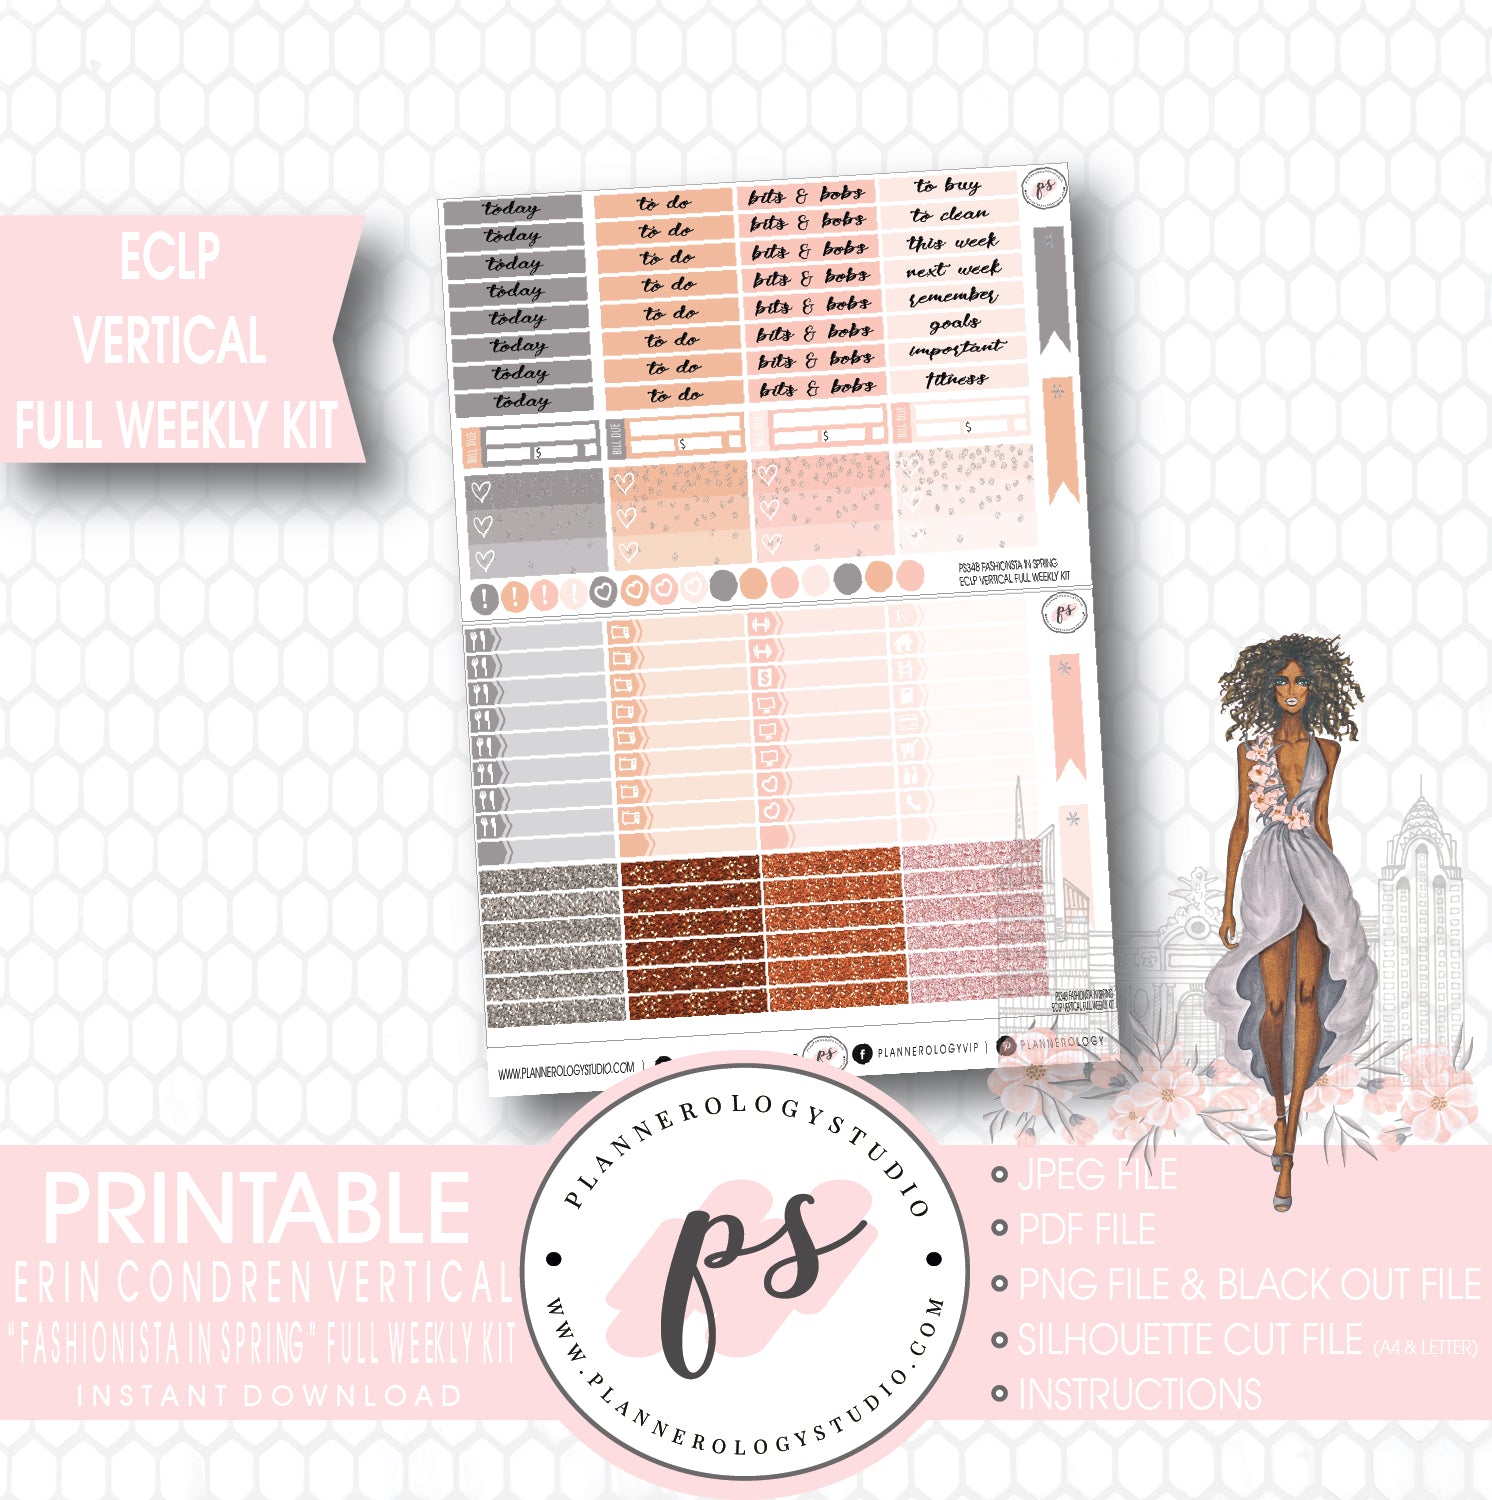 Fashionista in Spring Full Weekly Kit Printable Planner Stickers (for use with ECLP Vertical) - Plannerologystudio